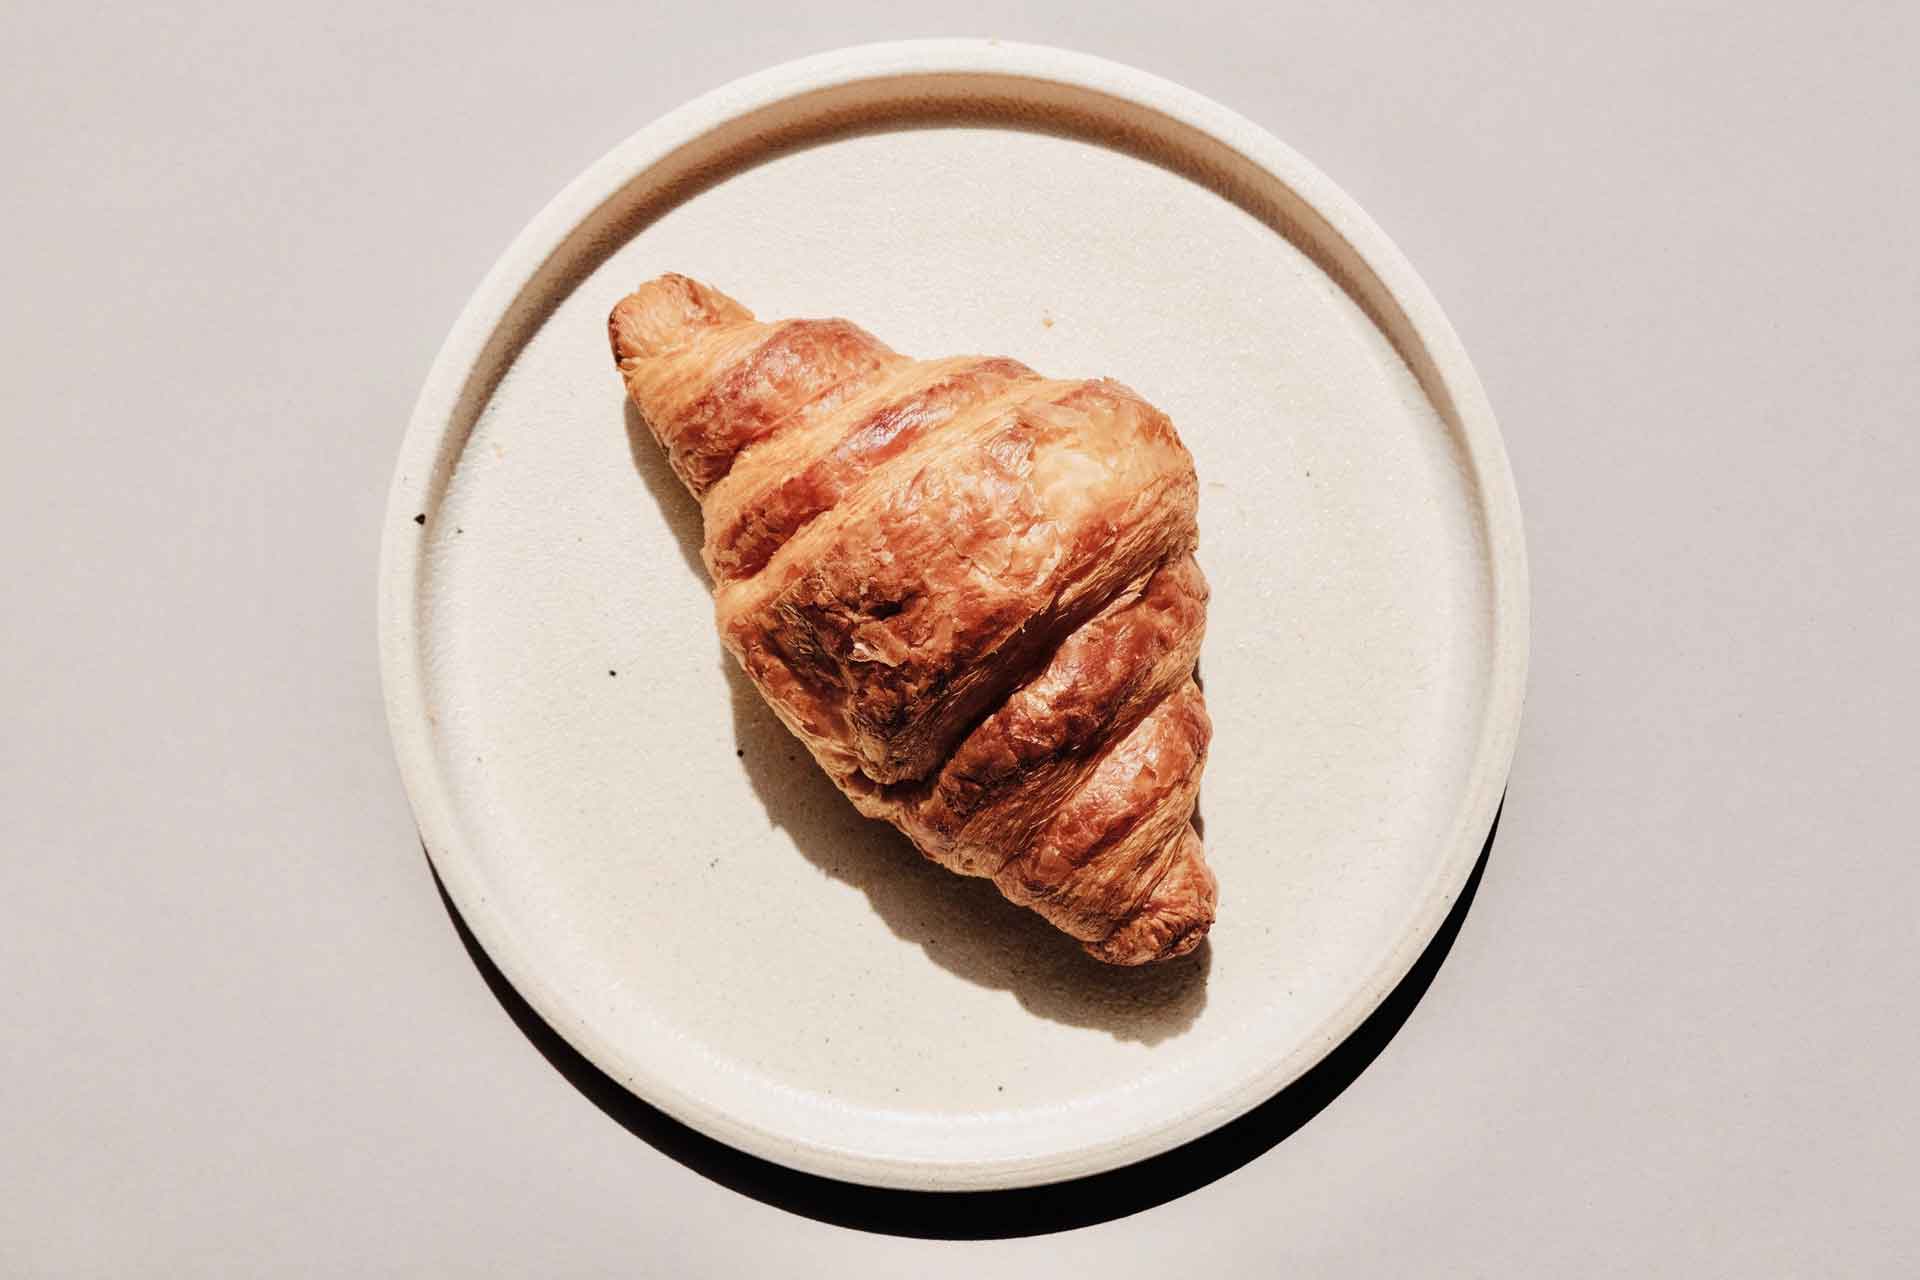 plate with single croissant